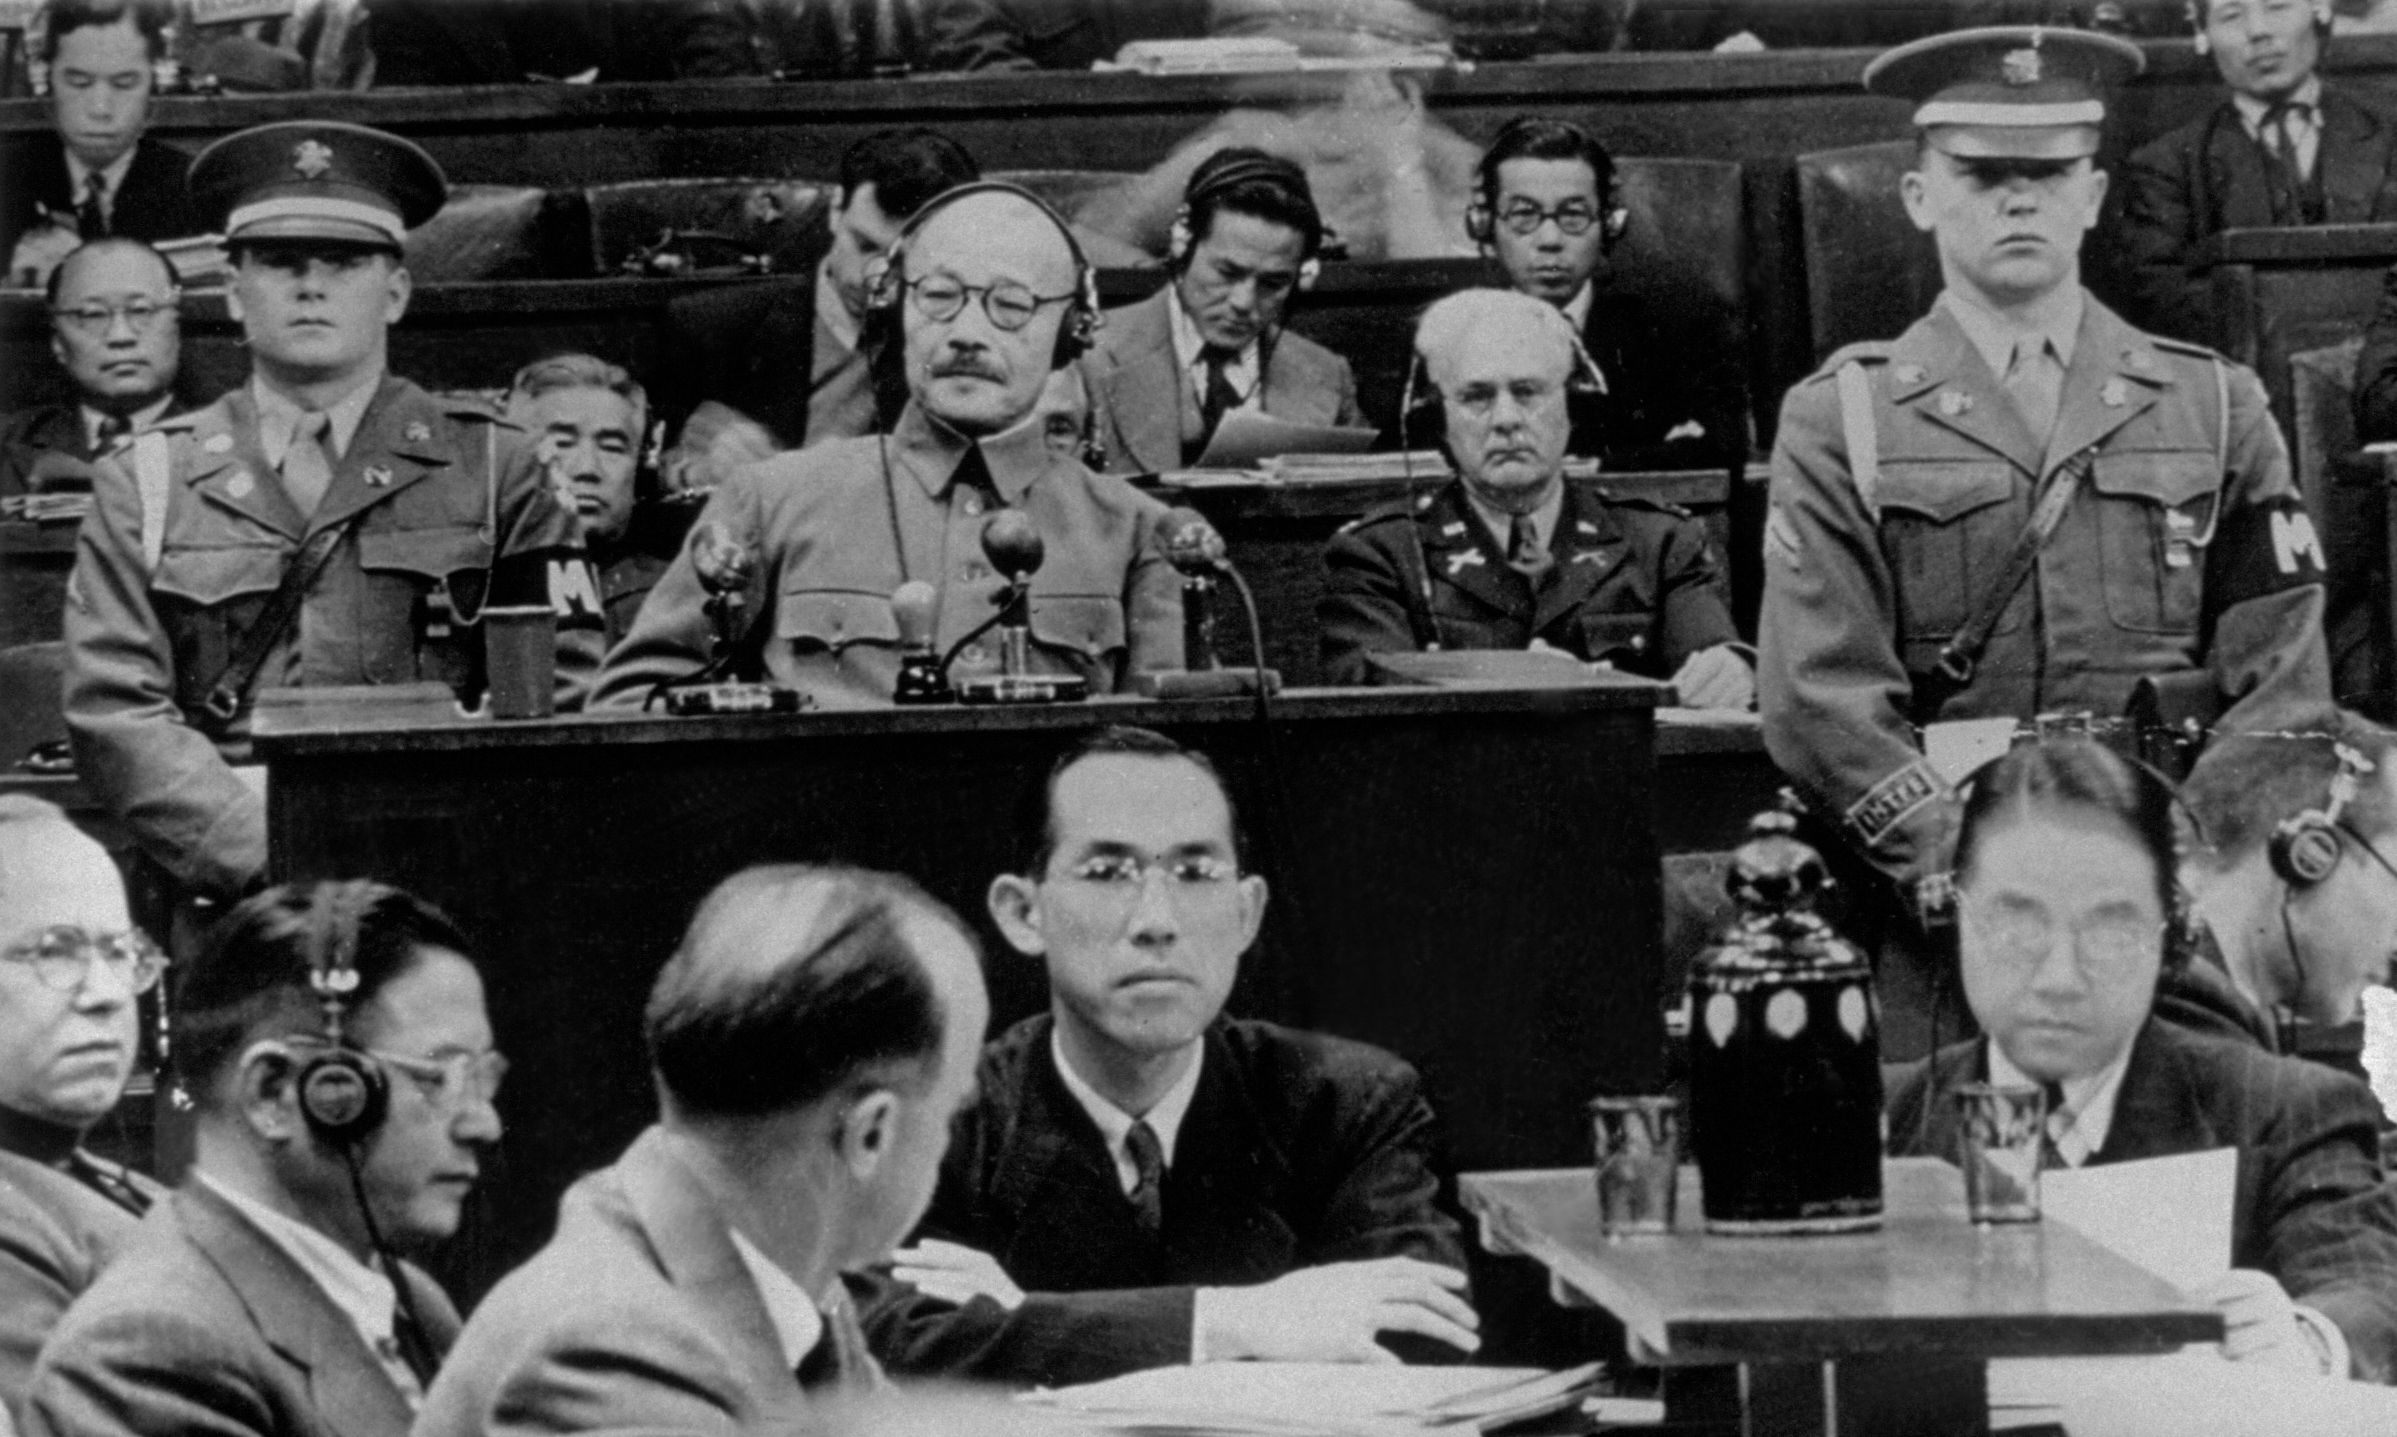 Tojo takes the stand during the International Military Tribunal for the Far East.(Keystone/Getty Images)